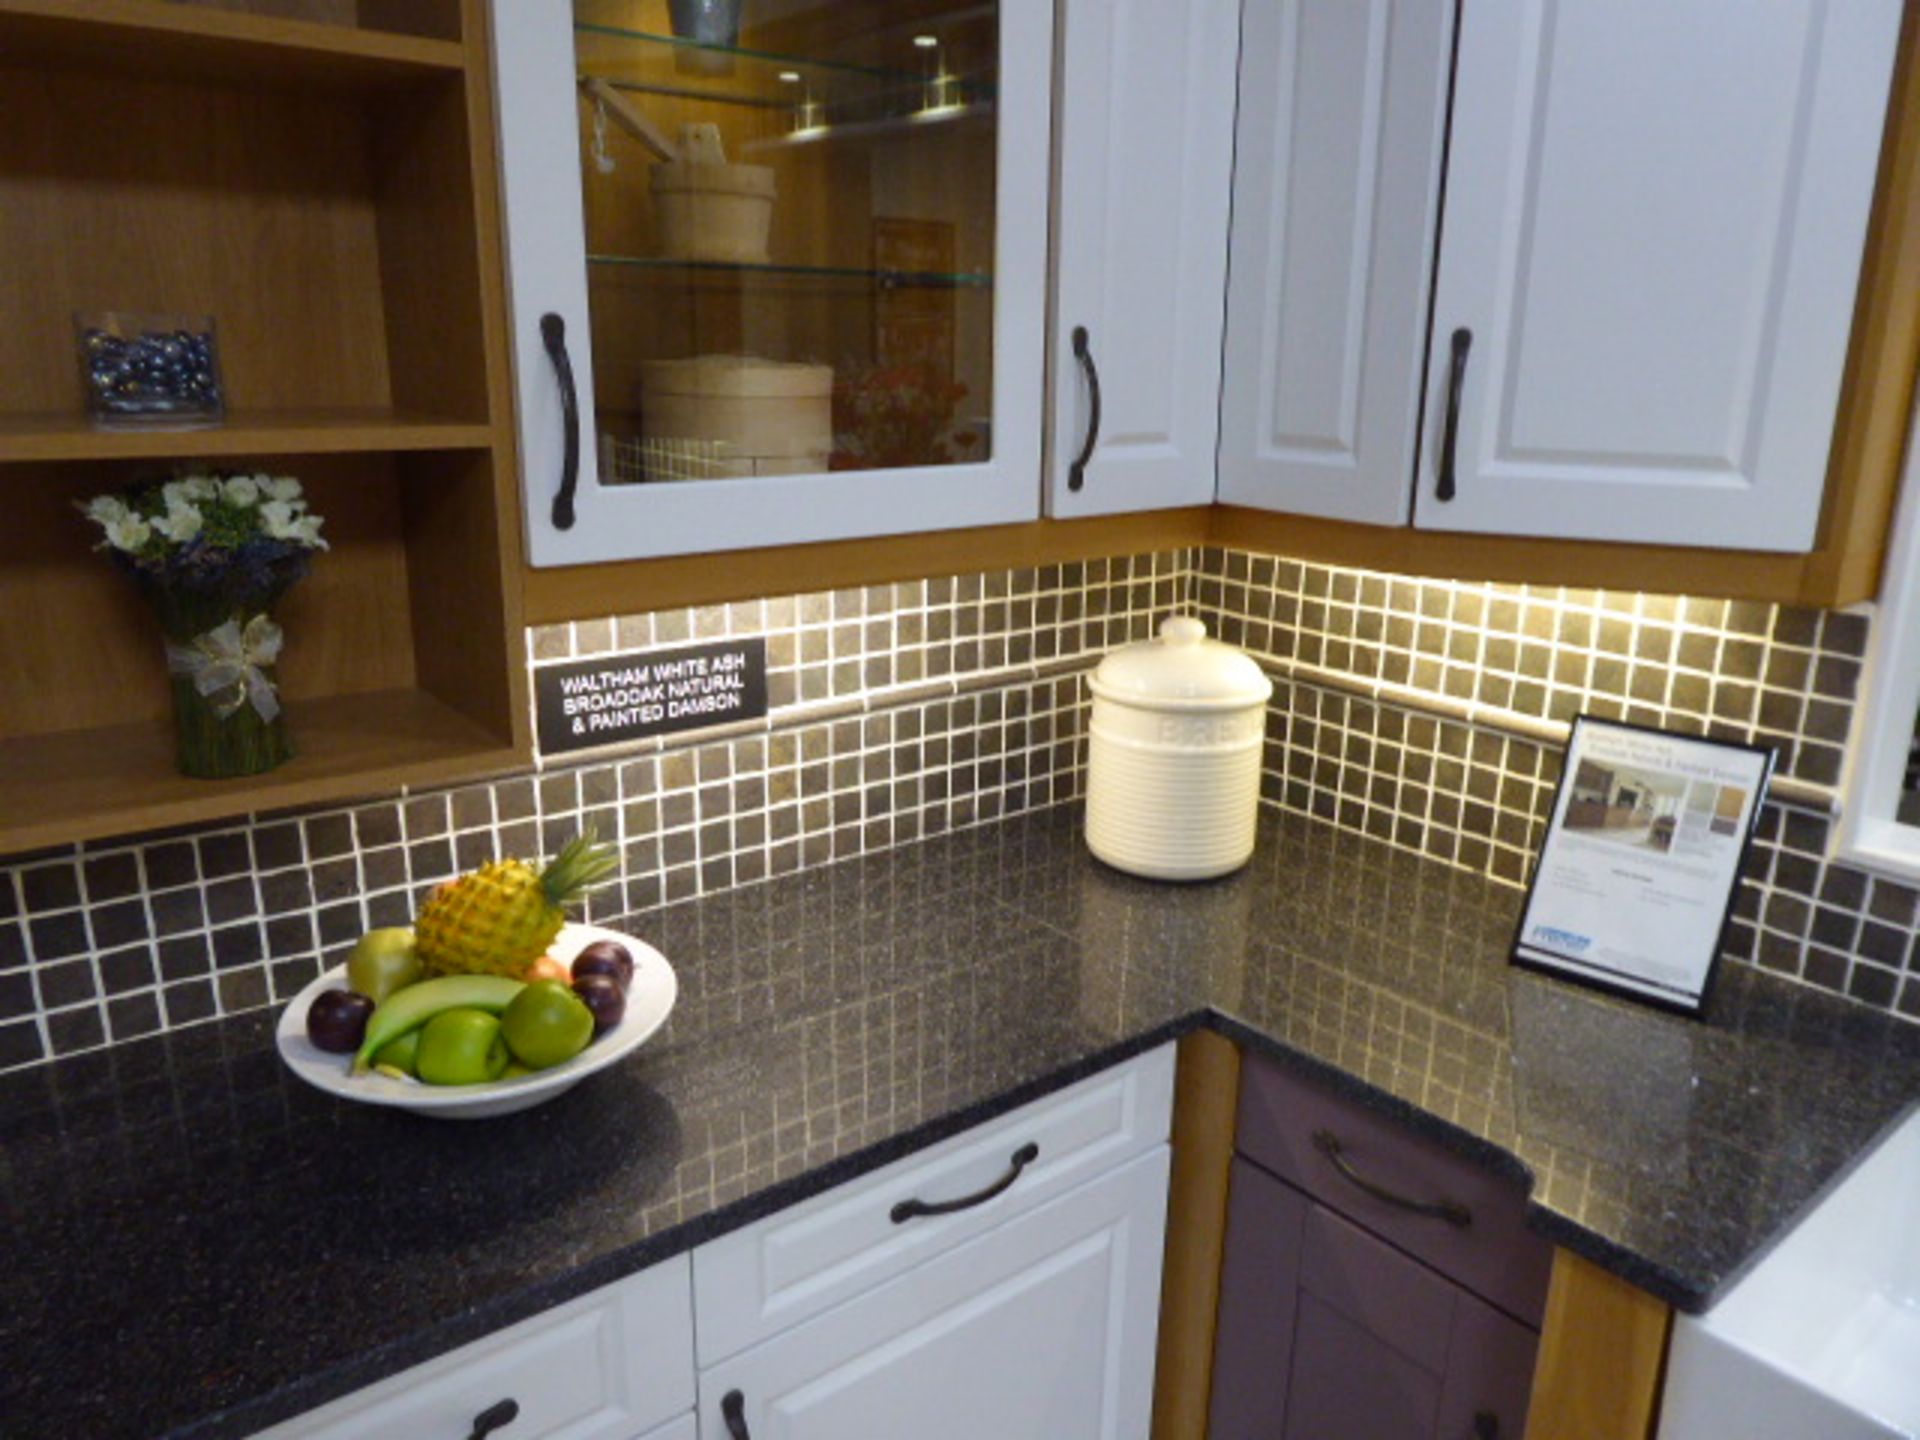 Waltham White Ash Broadoak Natural and Painted Damson kitchen in corner shape with a granite - Image 4 of 9